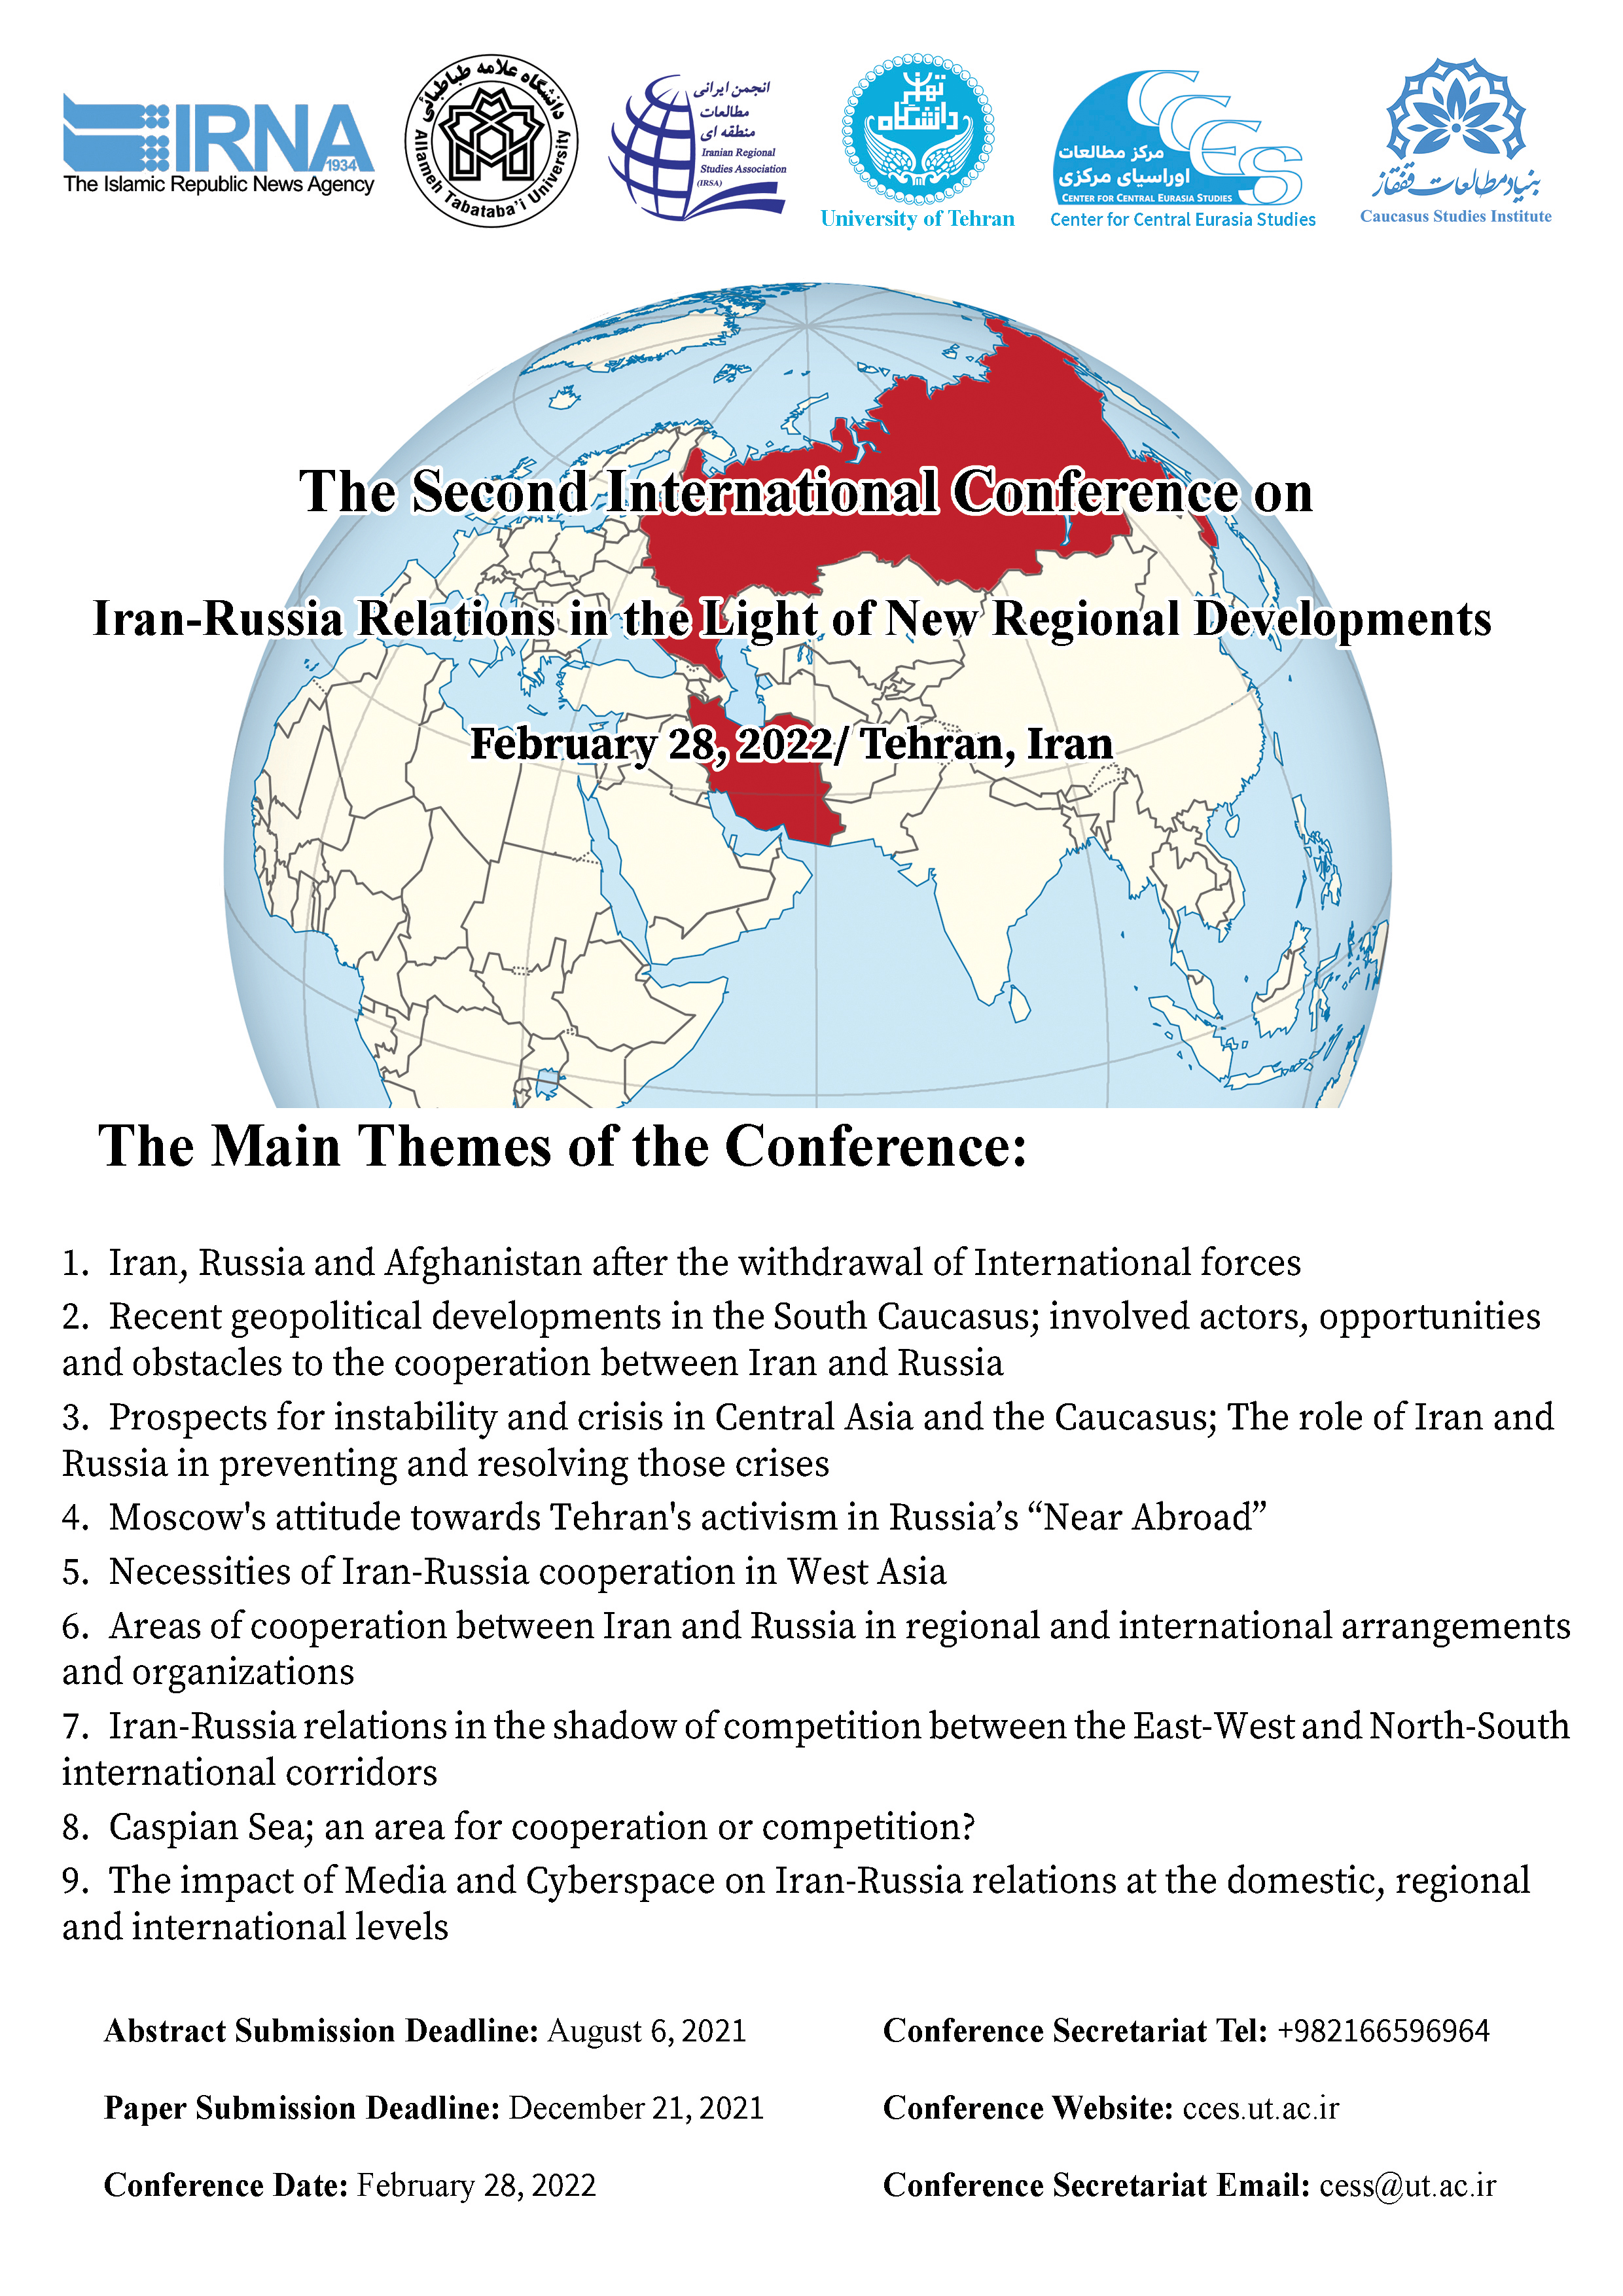 International Conference on Iran-Russia Relations in the Light of New Regional Developments